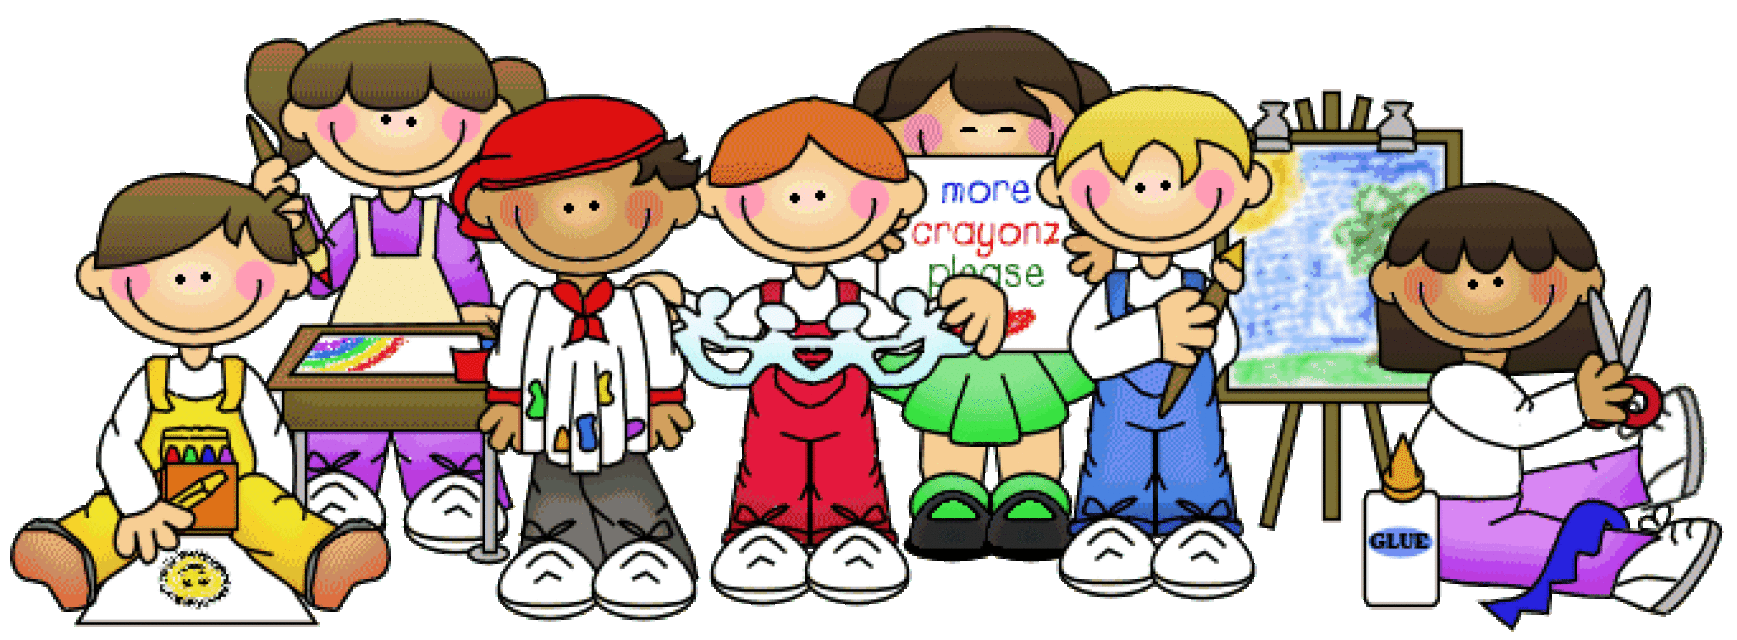 Curriculum lesson building for. I clipart classroom